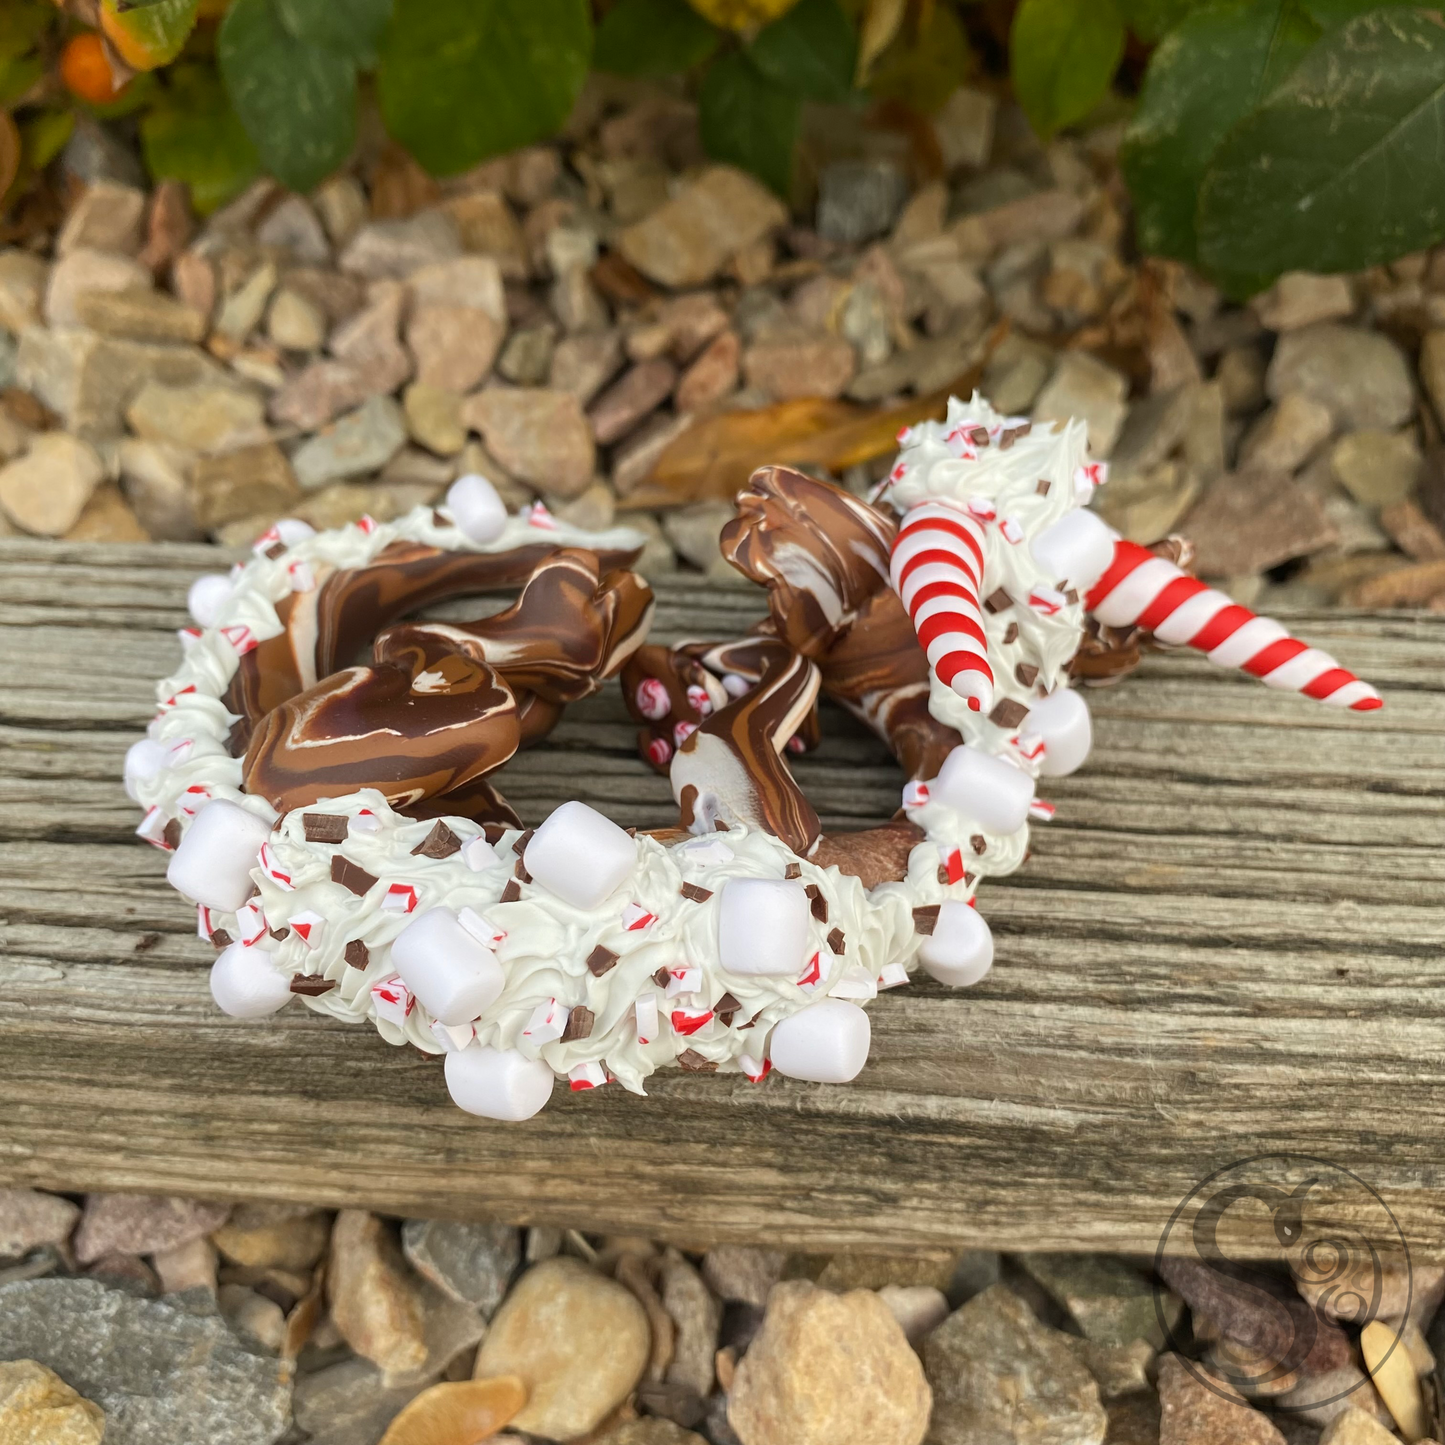 Curled up Peppermint and Chocolate Chip Hot-Chocolate Dragon